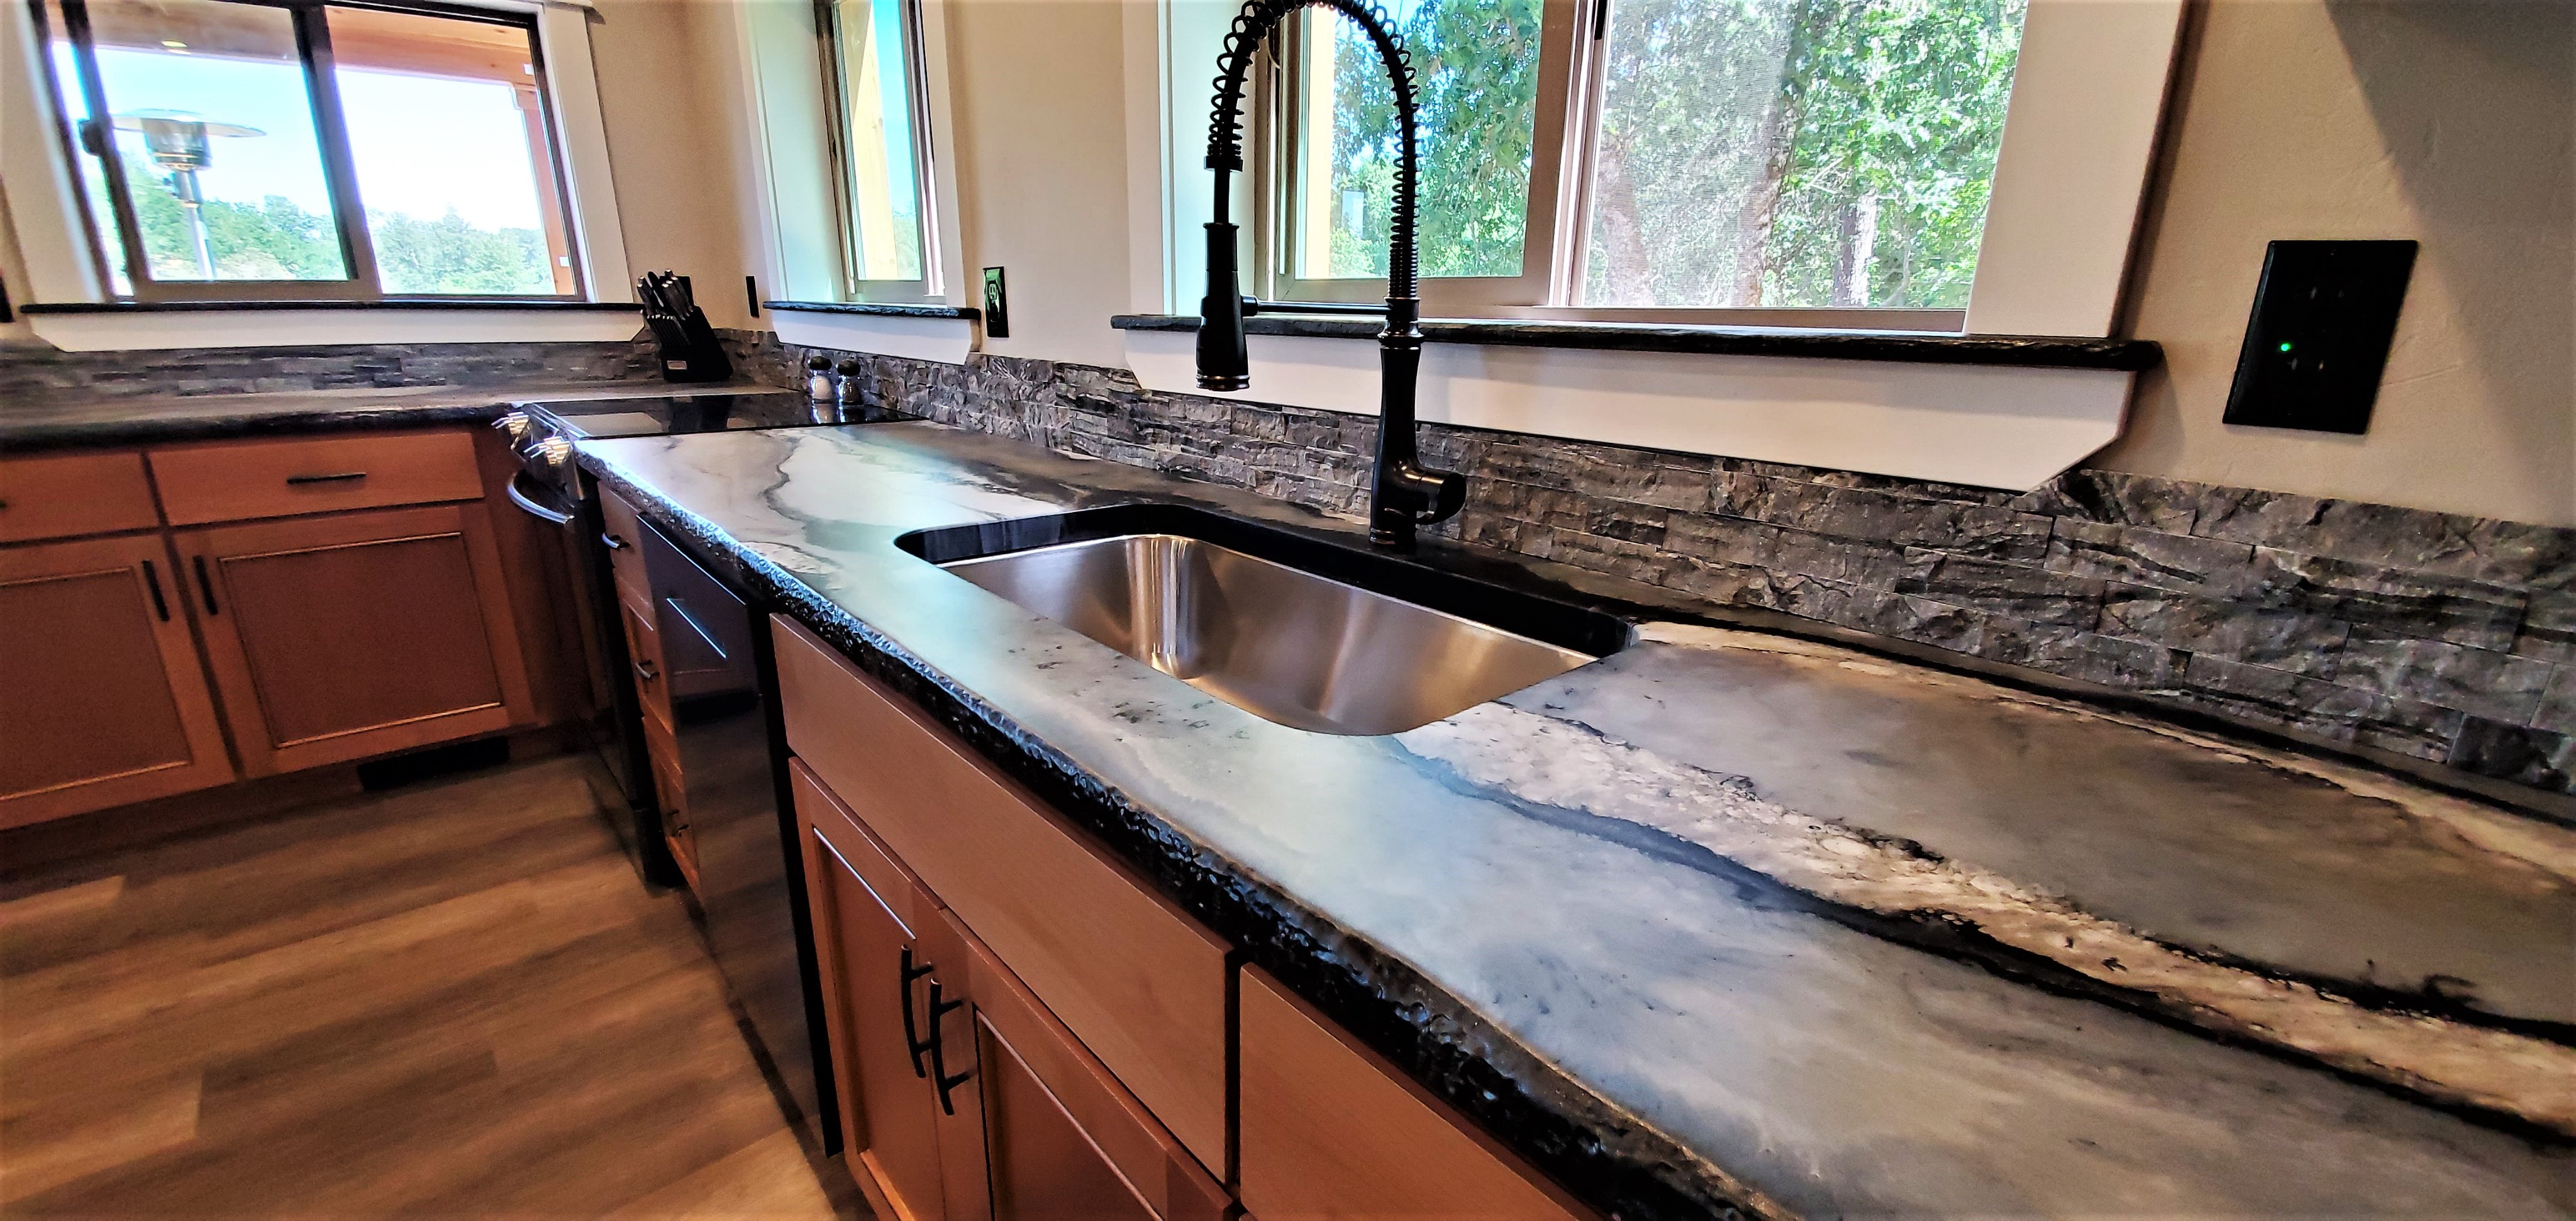 stonecoatcountertops on X: What Epoxy Project using Stone Coat have you  done that you're proud of?? We want to hear about it! Drop a comment and  pictures below if you have them!